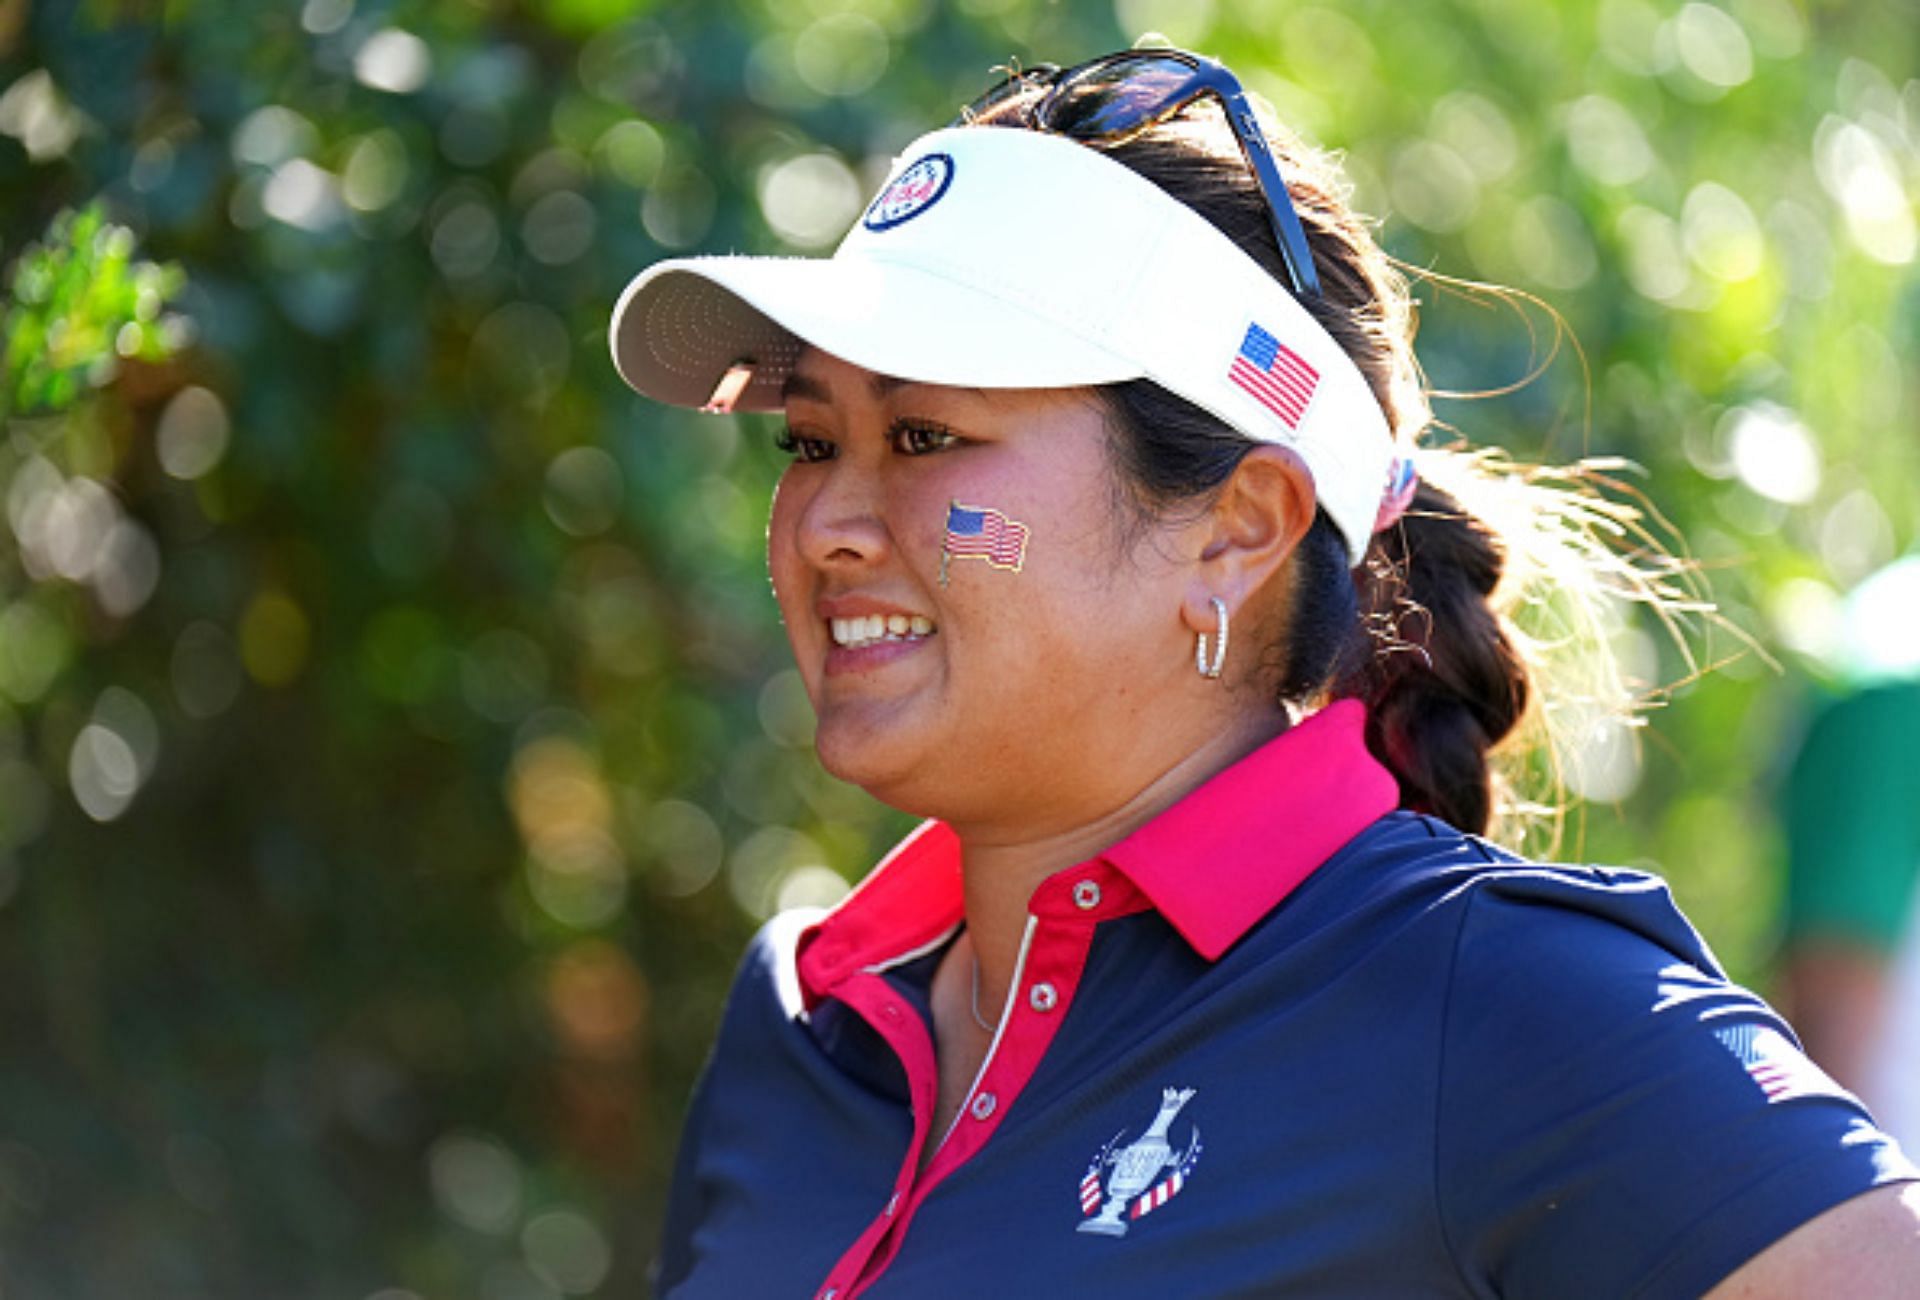 Lilia Vu will be the top ranked golfer at the 2023 BMW Ladies Championship (Image via Getty).